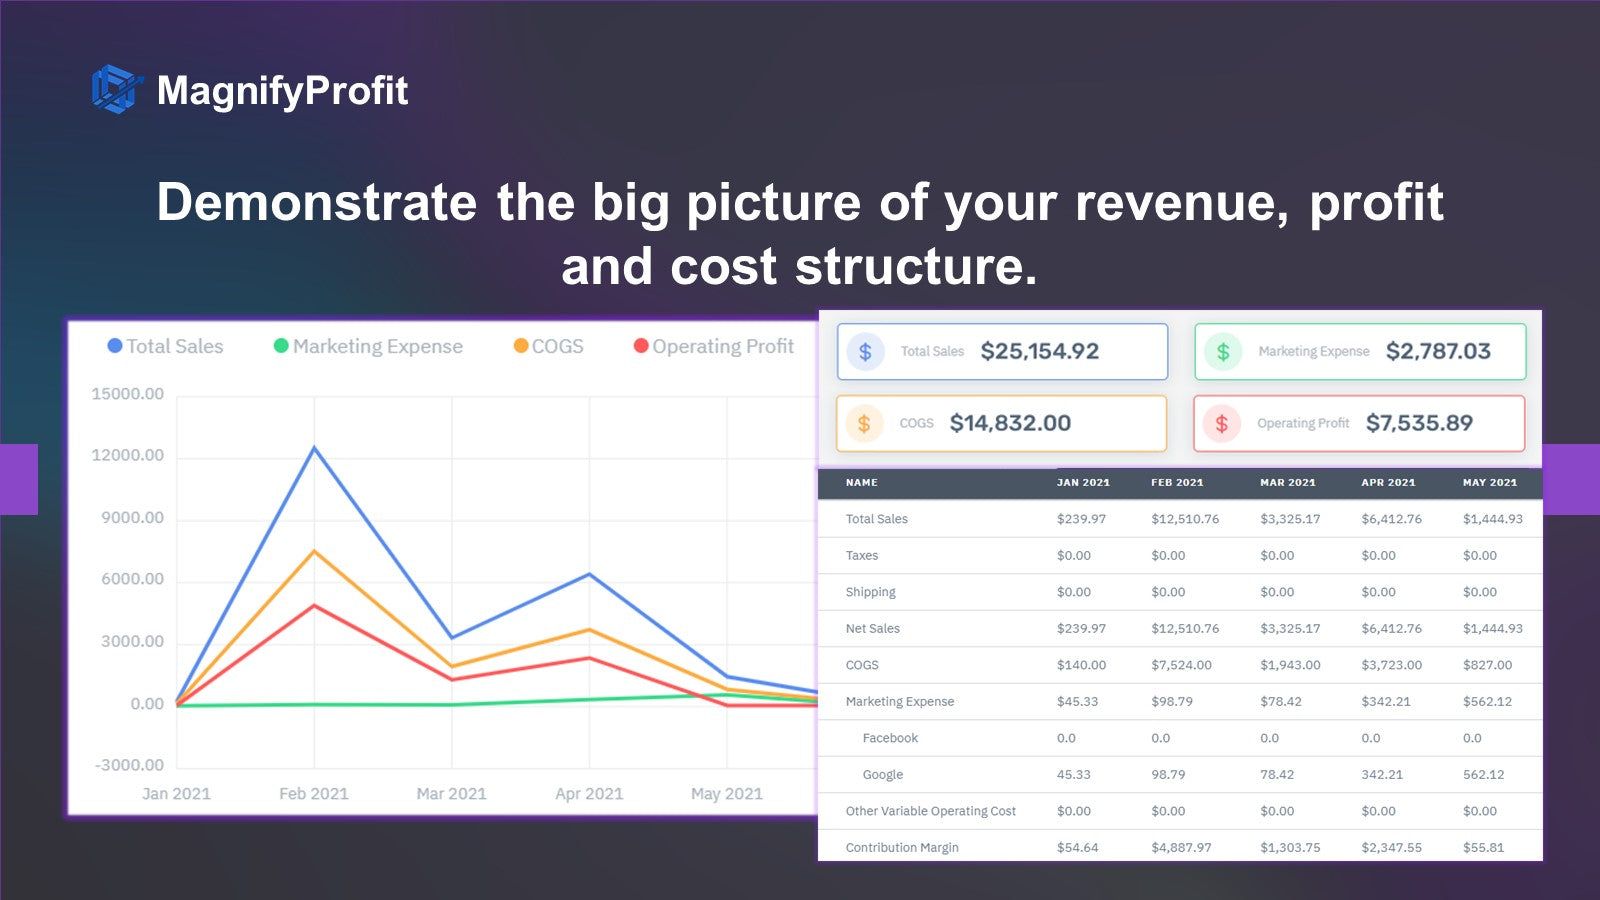 Demonstrate the big picture of your revenue, profit and cost